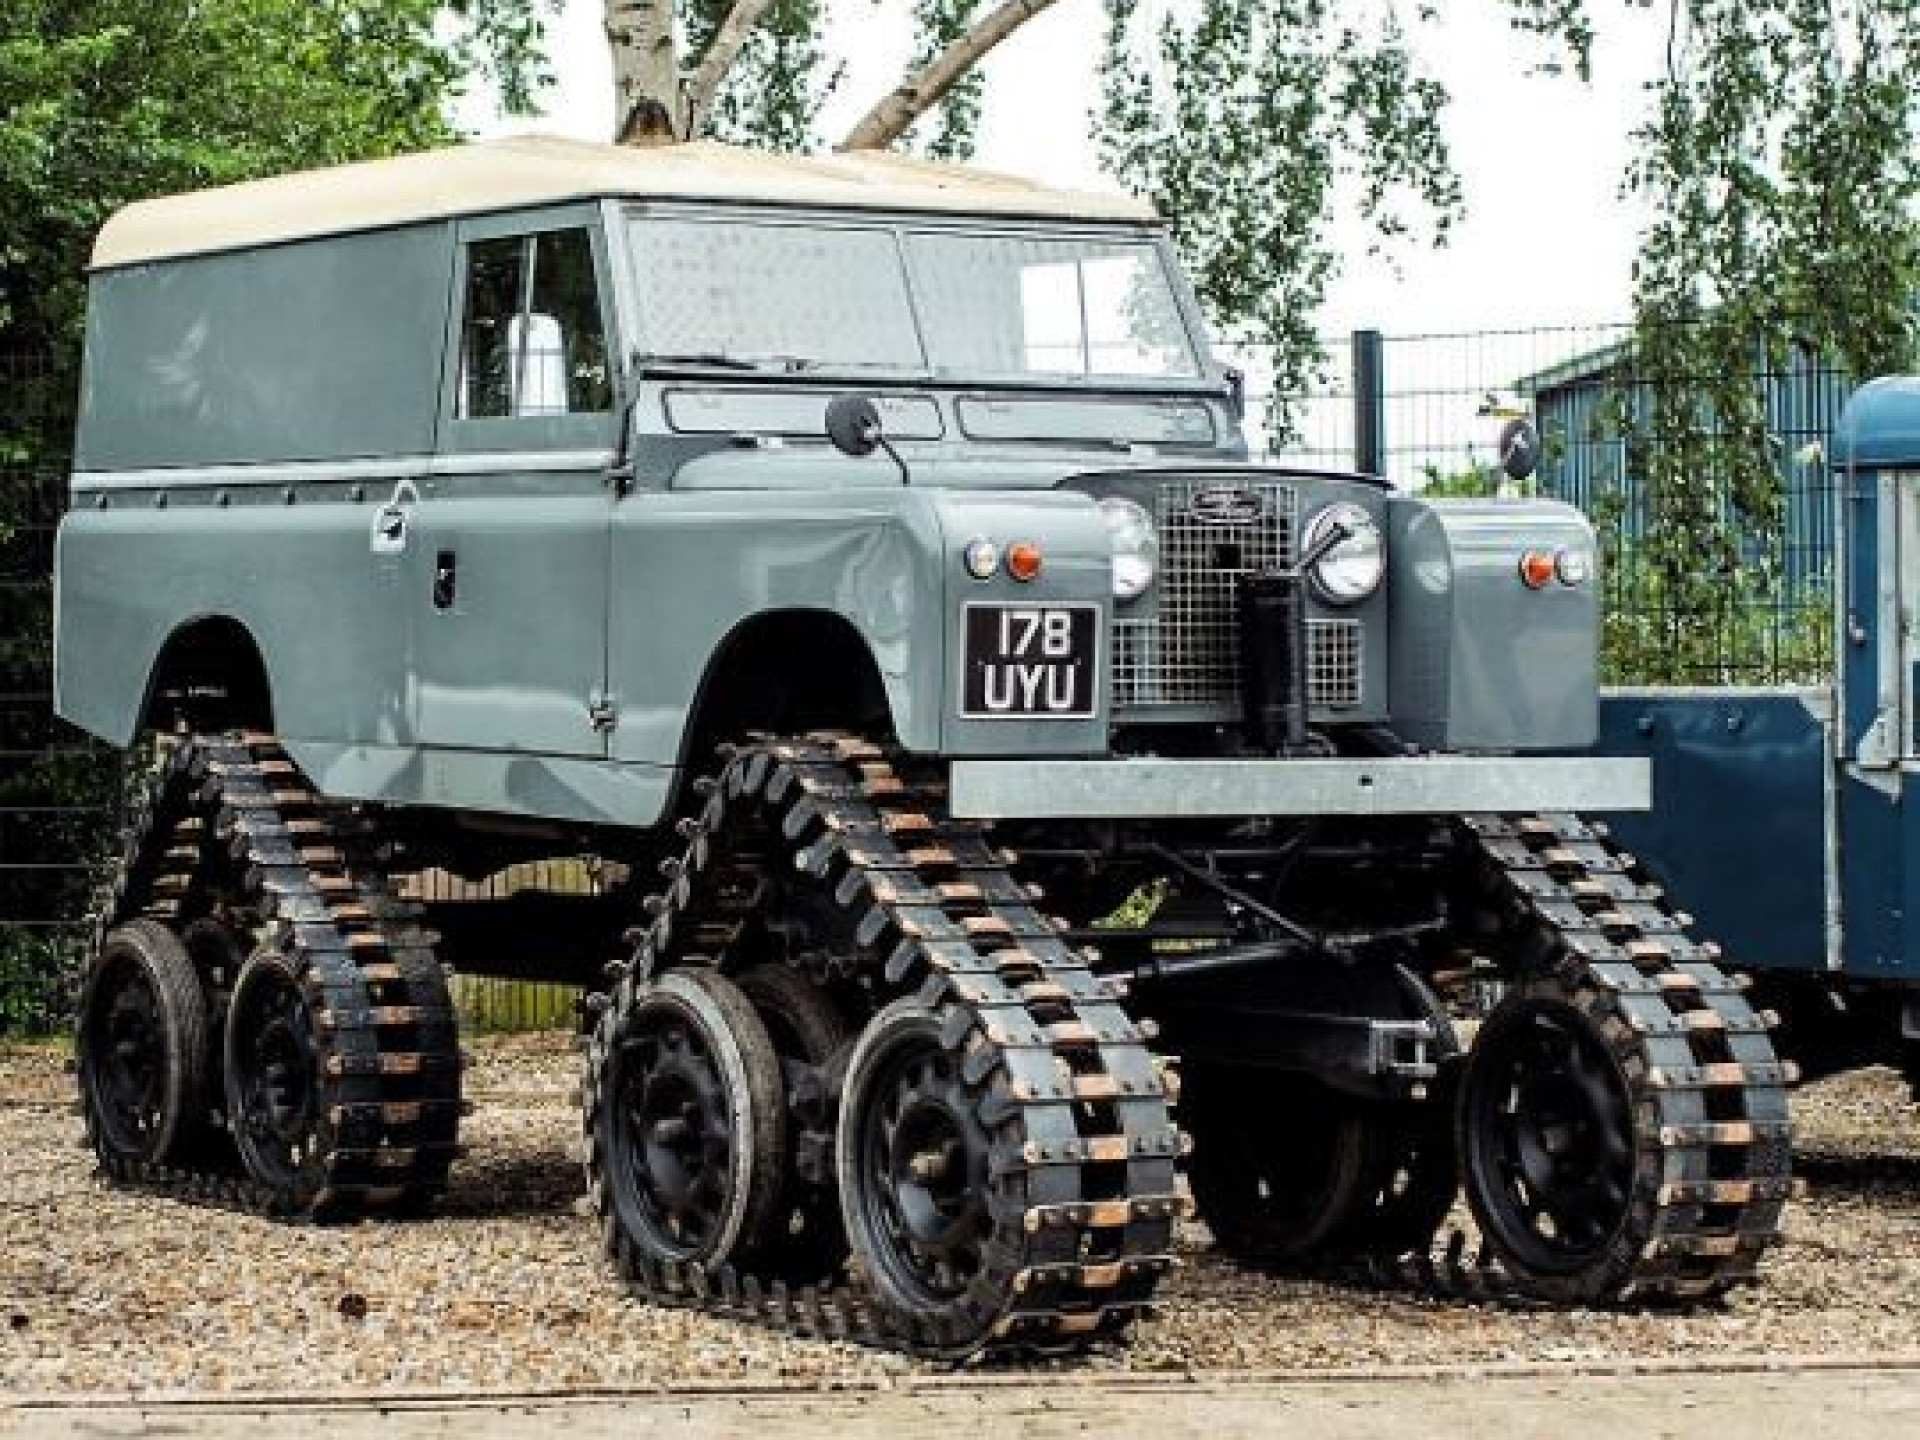 The Holy Grail of adapted Land Rovers – Land Rover Heritage Collection